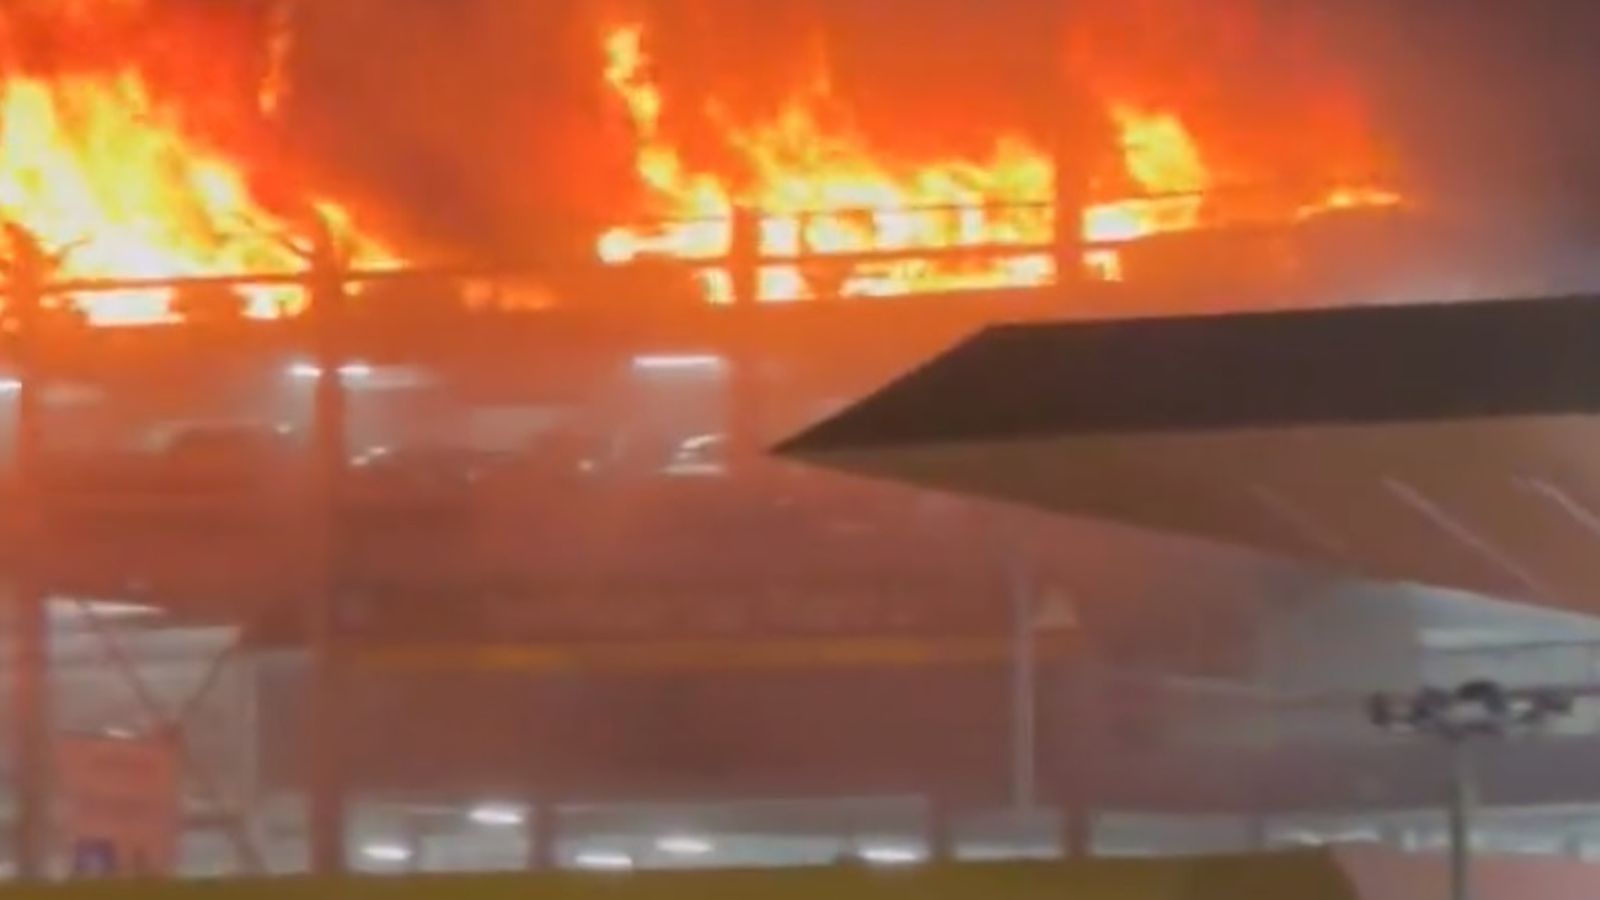 Luton Airport fire: Flights suspended as emergency crews respond to huge blaze at car park